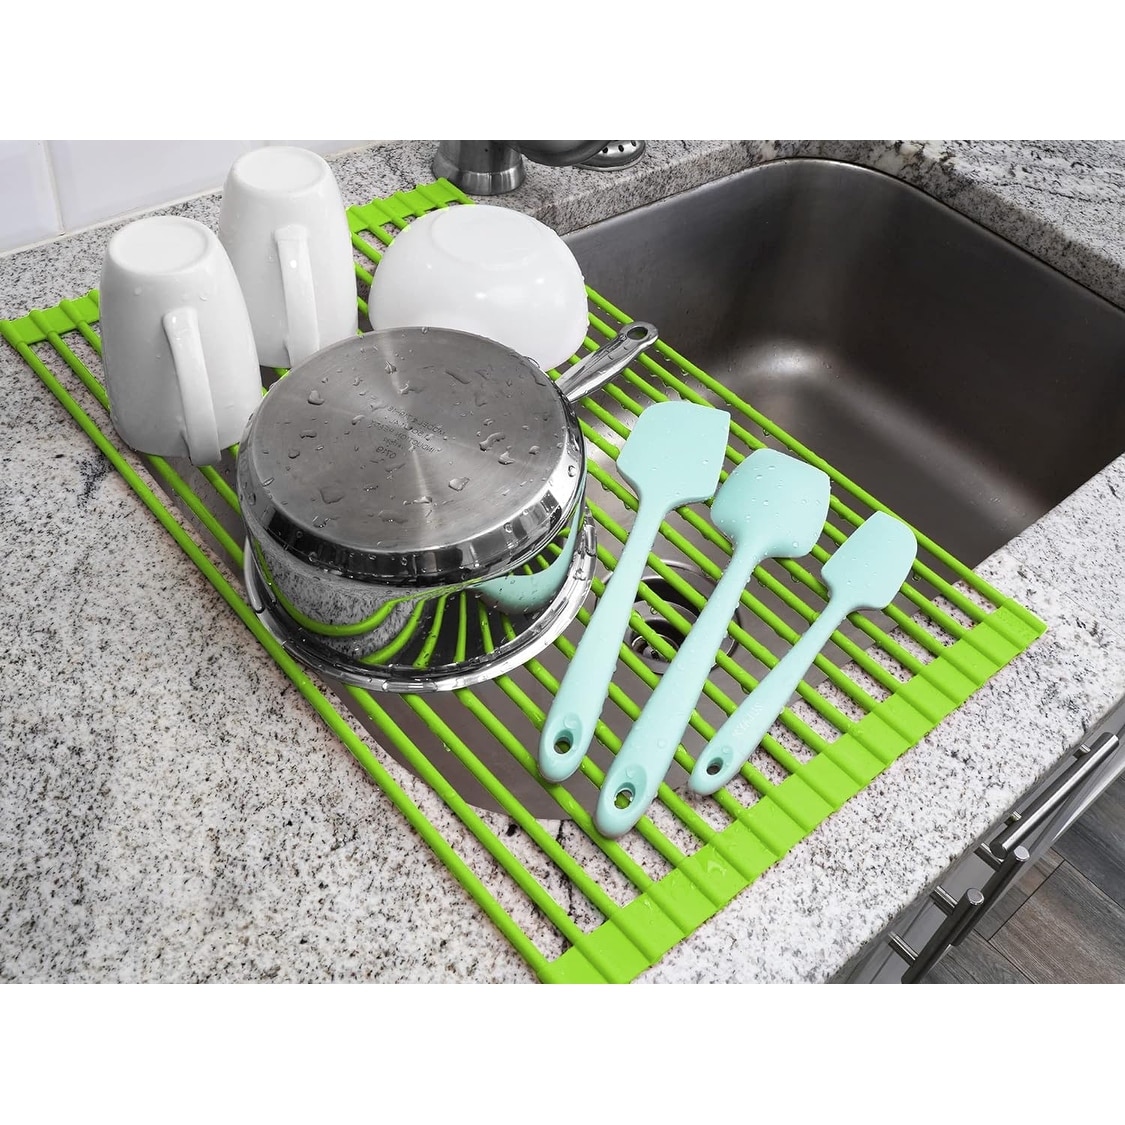 https://ak1.ostkcdn.com/images/products/is/images/direct/4110c9431166b83ac3b945ab9f96e3ef508d9d61/Zulay-Kitchen-Multipurpose-Roll-Up-Sink-Drying-Rack-%28Large%29.jpg